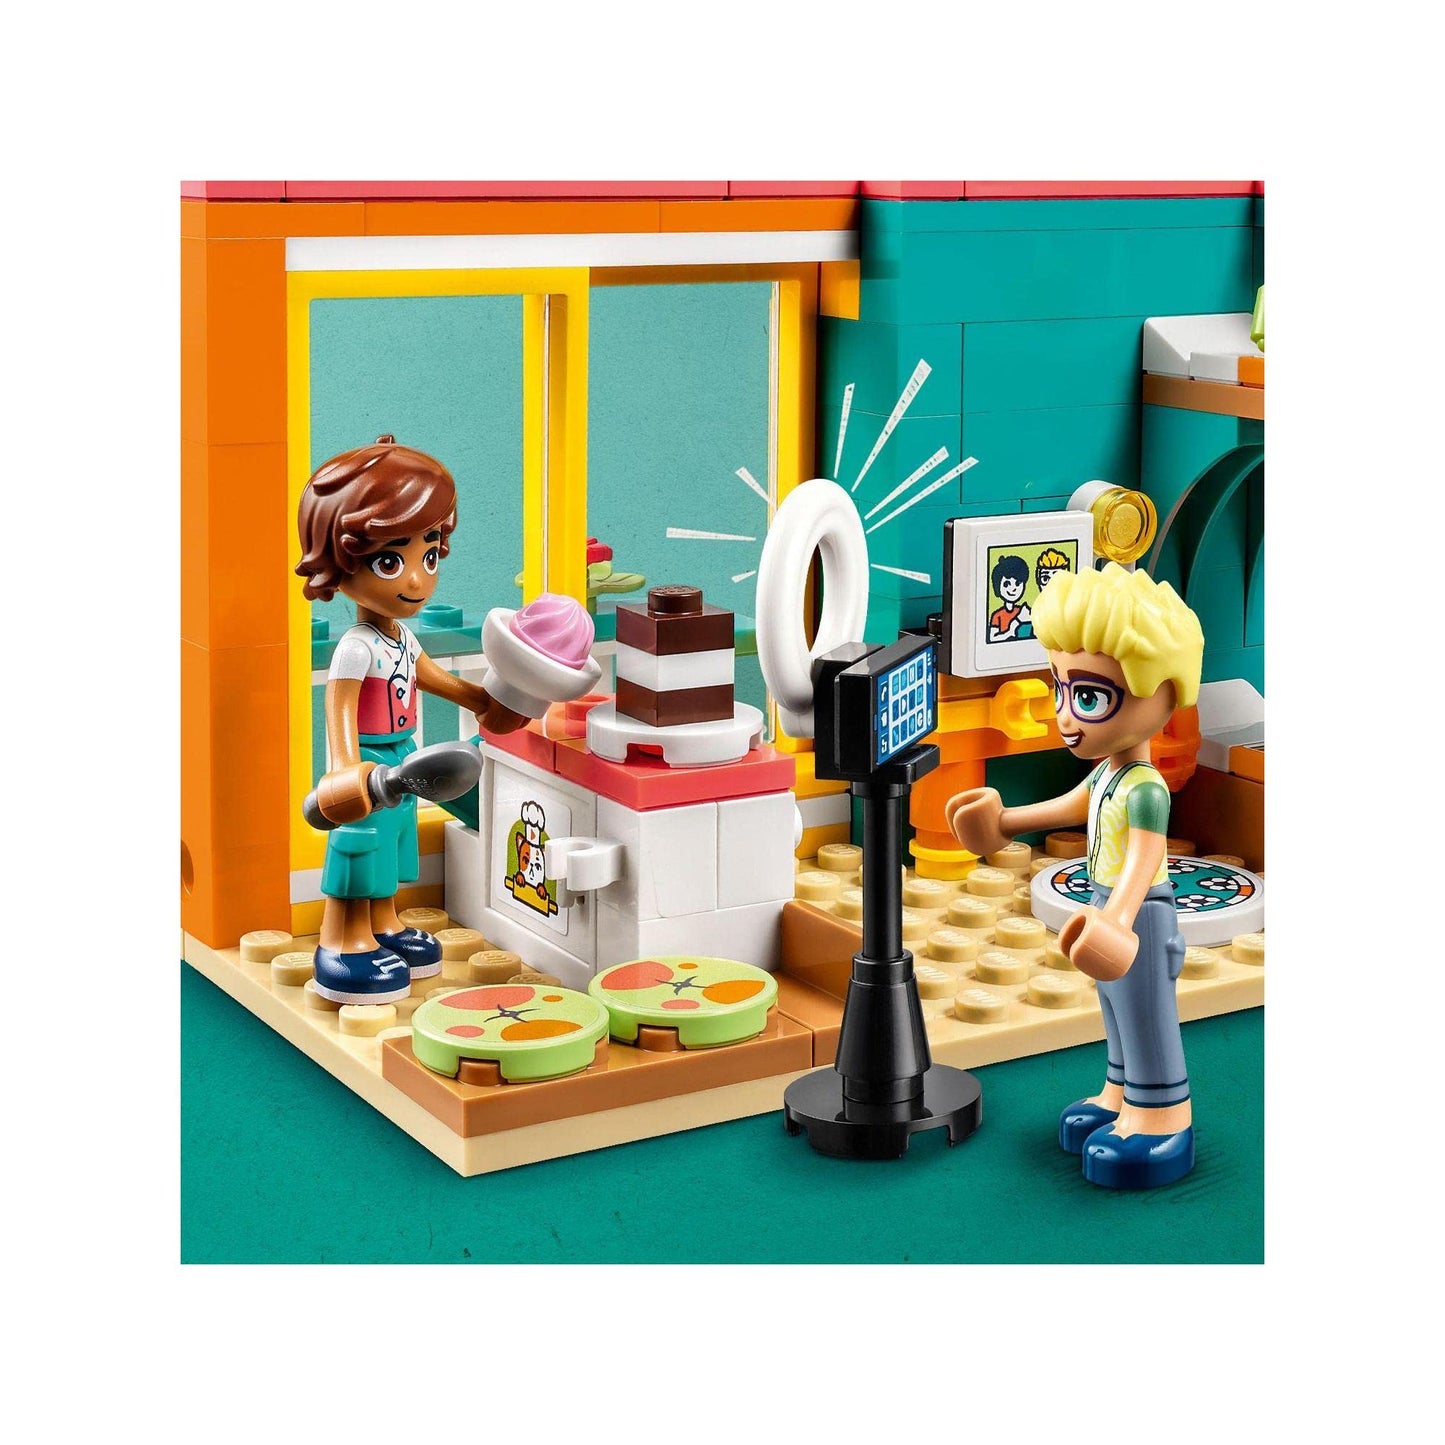 LEGO® Friends Leo's Room 41754 Building Toy